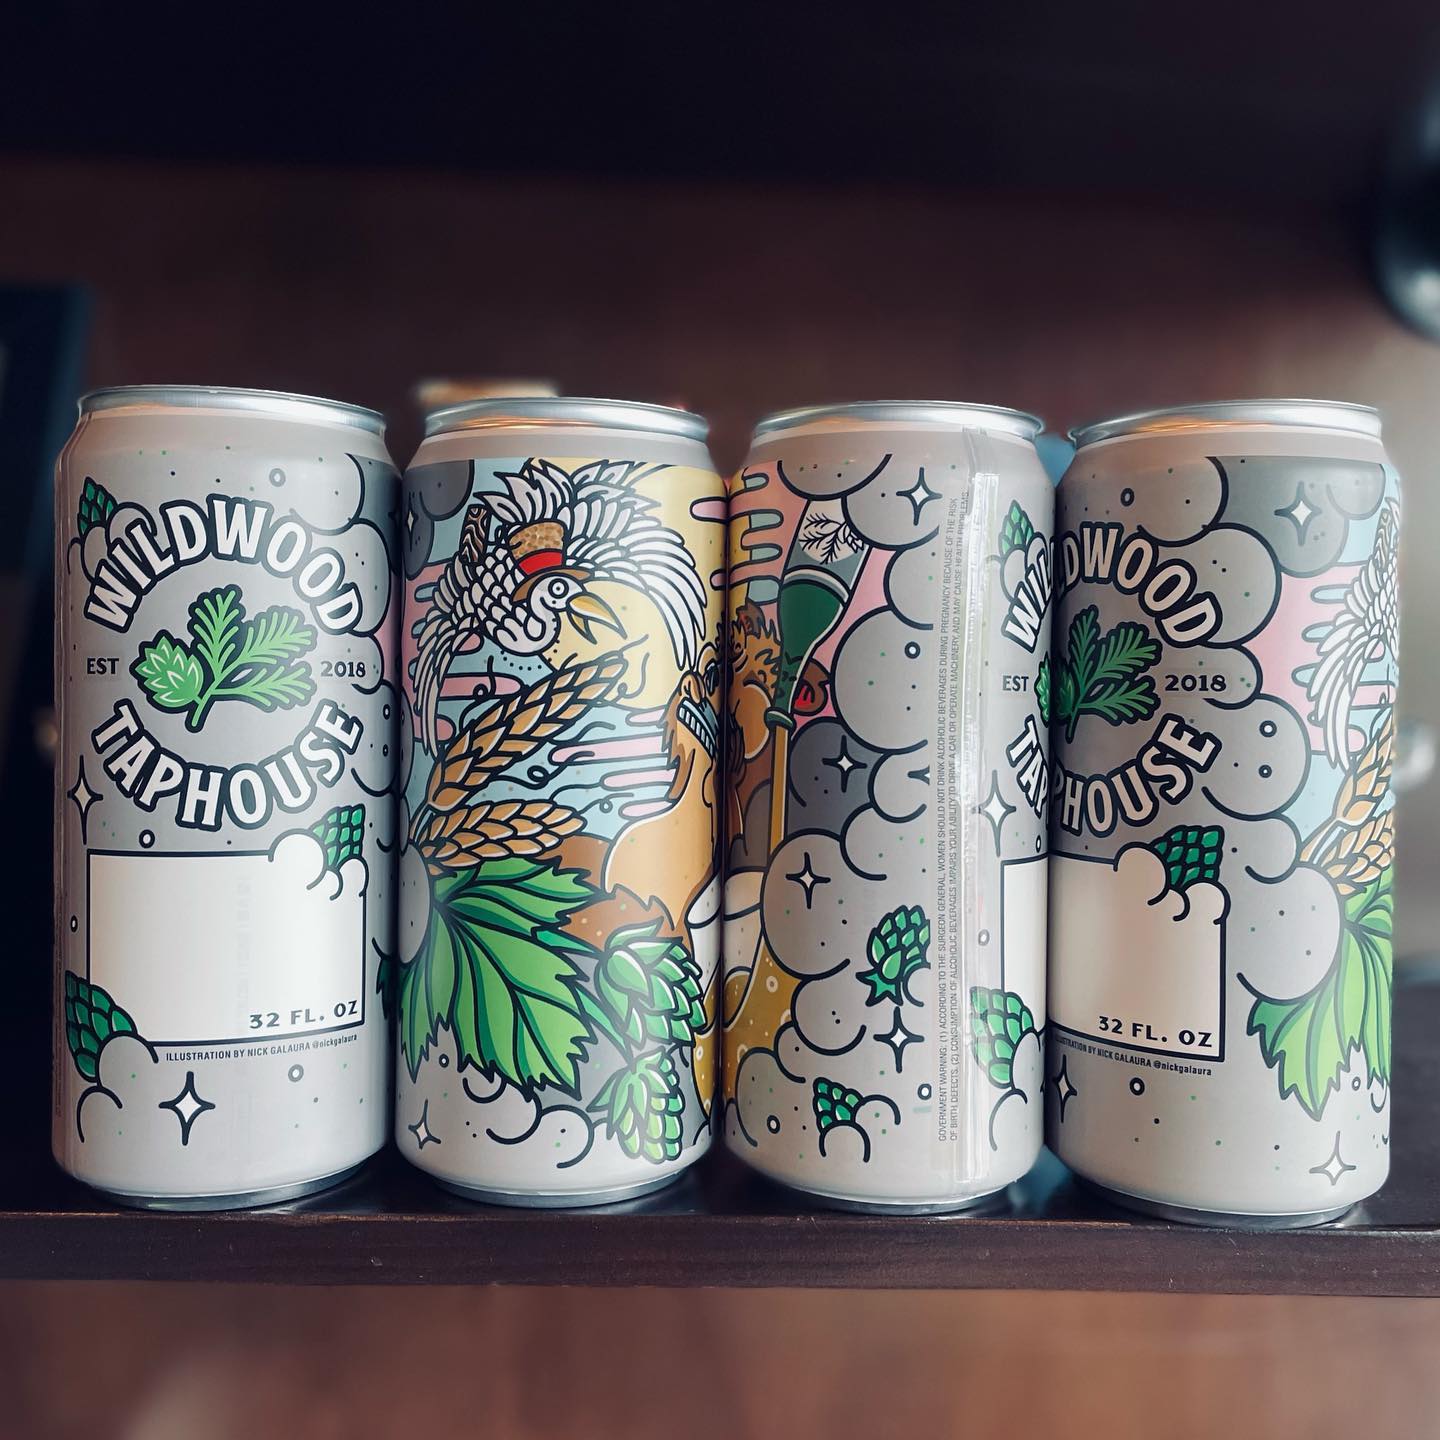 New crowler cans are in, and they are WRAPPED! 
This round we have partnered with Nick Galaura (@nickgalaura) a tattoo artist and wonderful human being based out of San Diego, California. Nick ran with some of our characters to create a bright and super fun illustration. Next time you’re in, grab a crowler to-go and we are sure the illustration will bring an extra big smile to your face. 
.
.
.
.
.
#wildwoodtaphouse #wildwoodtap #crowlernation #crowlers #hillsborobeer #craftbeer #beertogo #illustration #sandiegoartist #nickgalaura #pdx #pdxbeer #pnw #pnwbeer #beerme #partyon #twoisaparty